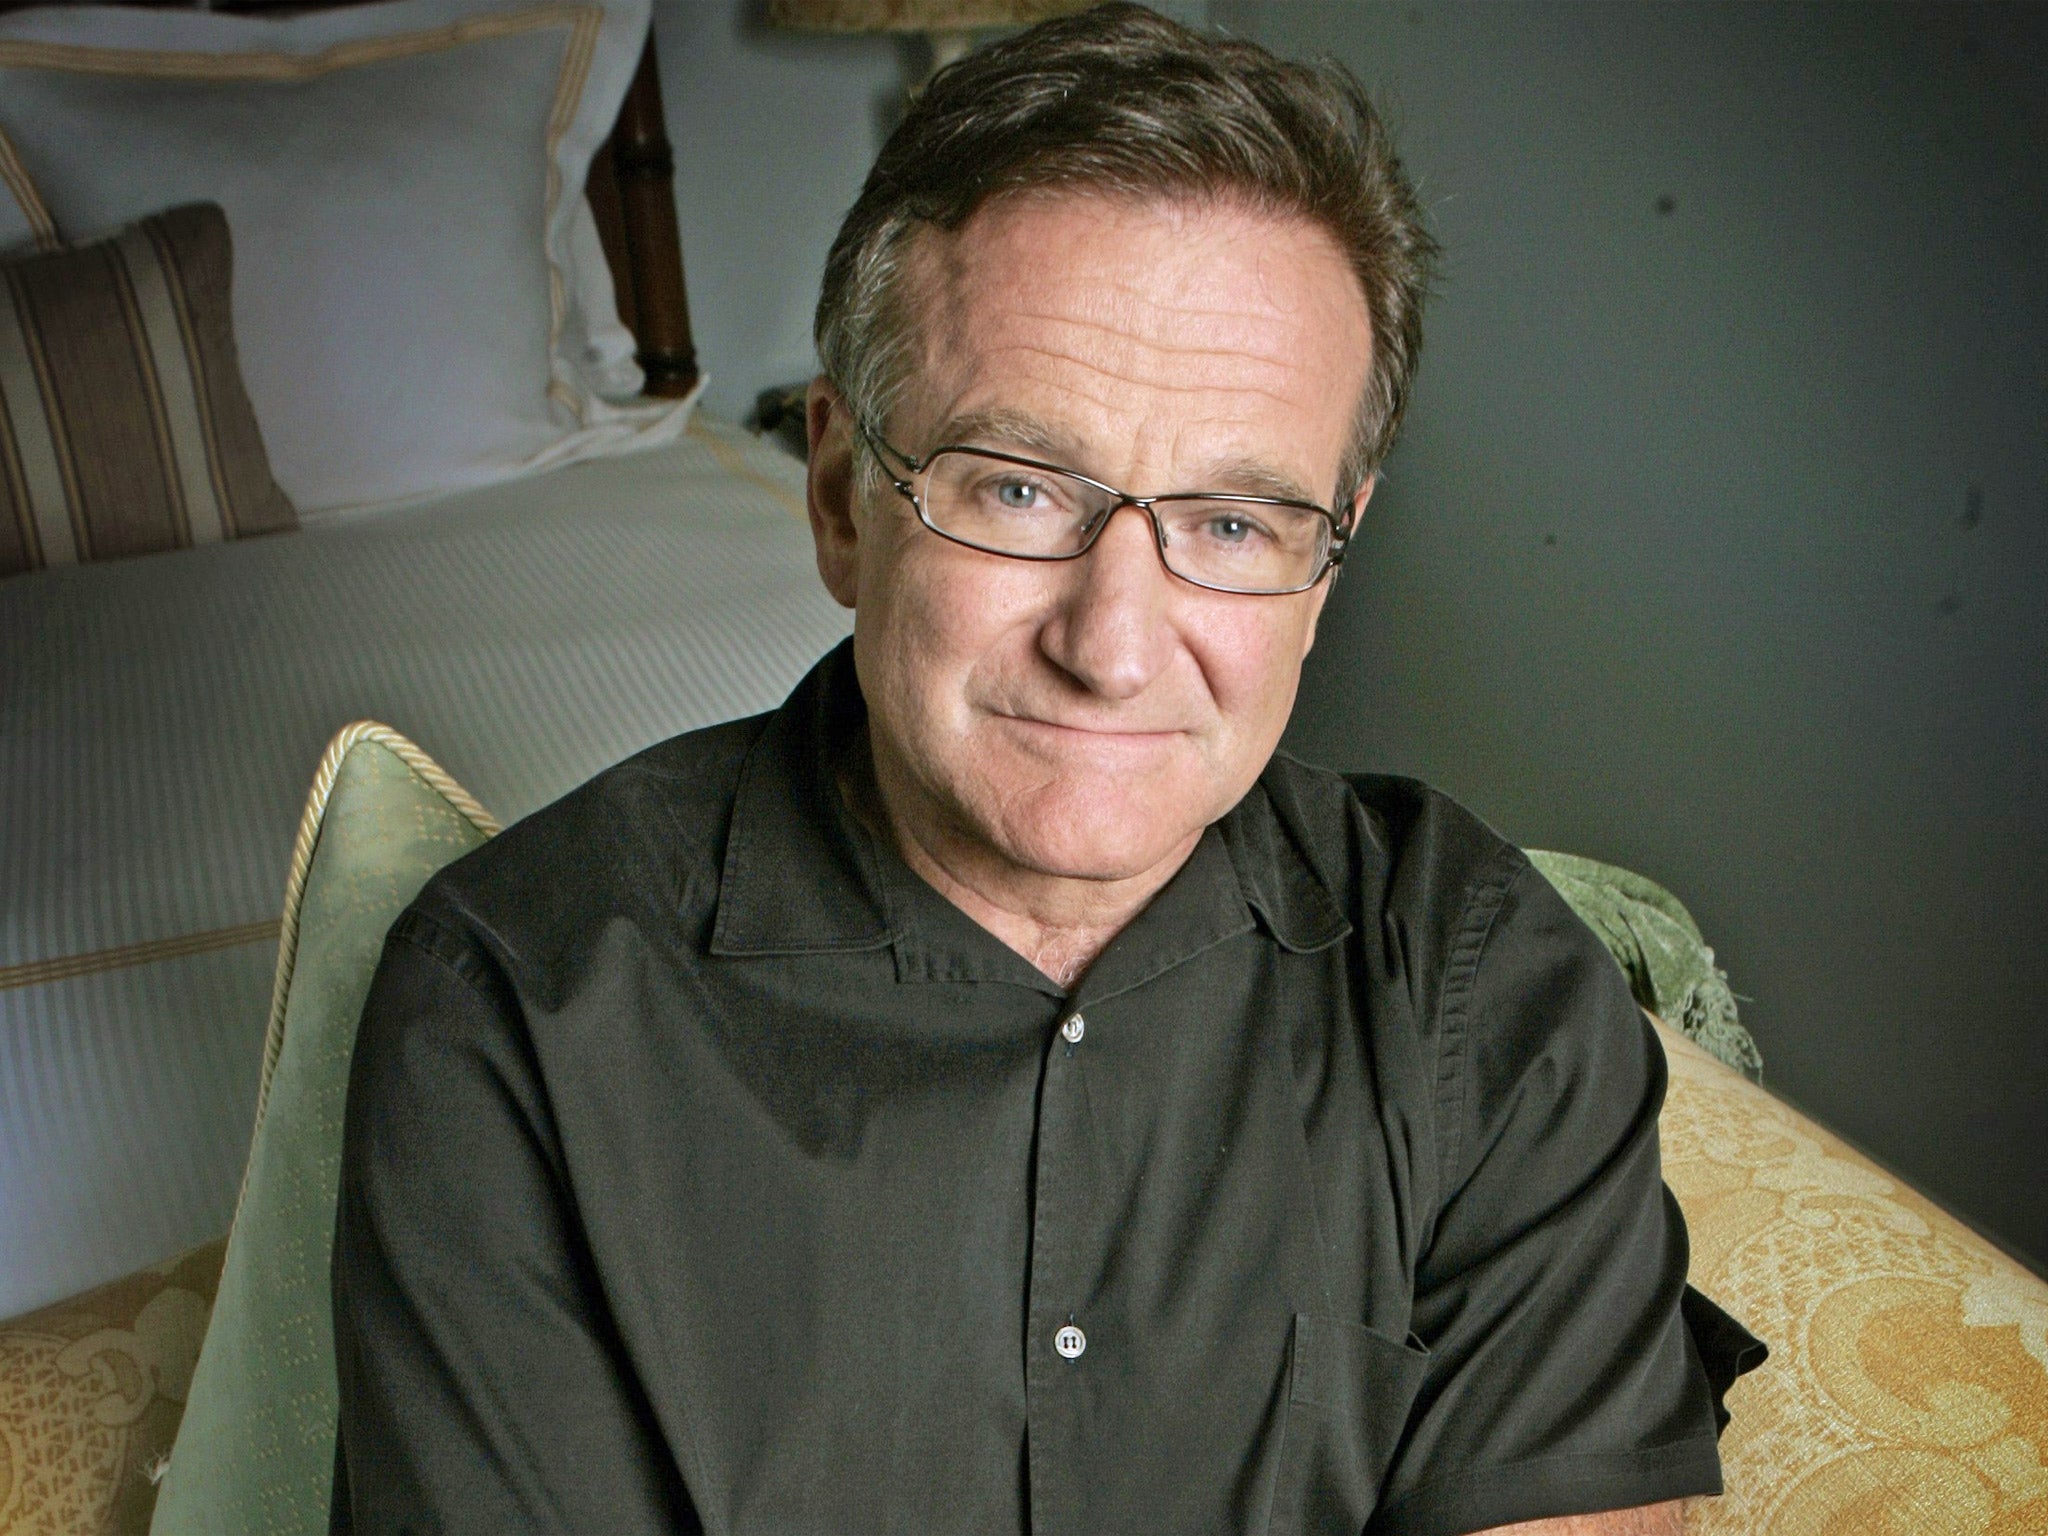 Robin Williams was in the early stages on Parkinson's, his wife has said